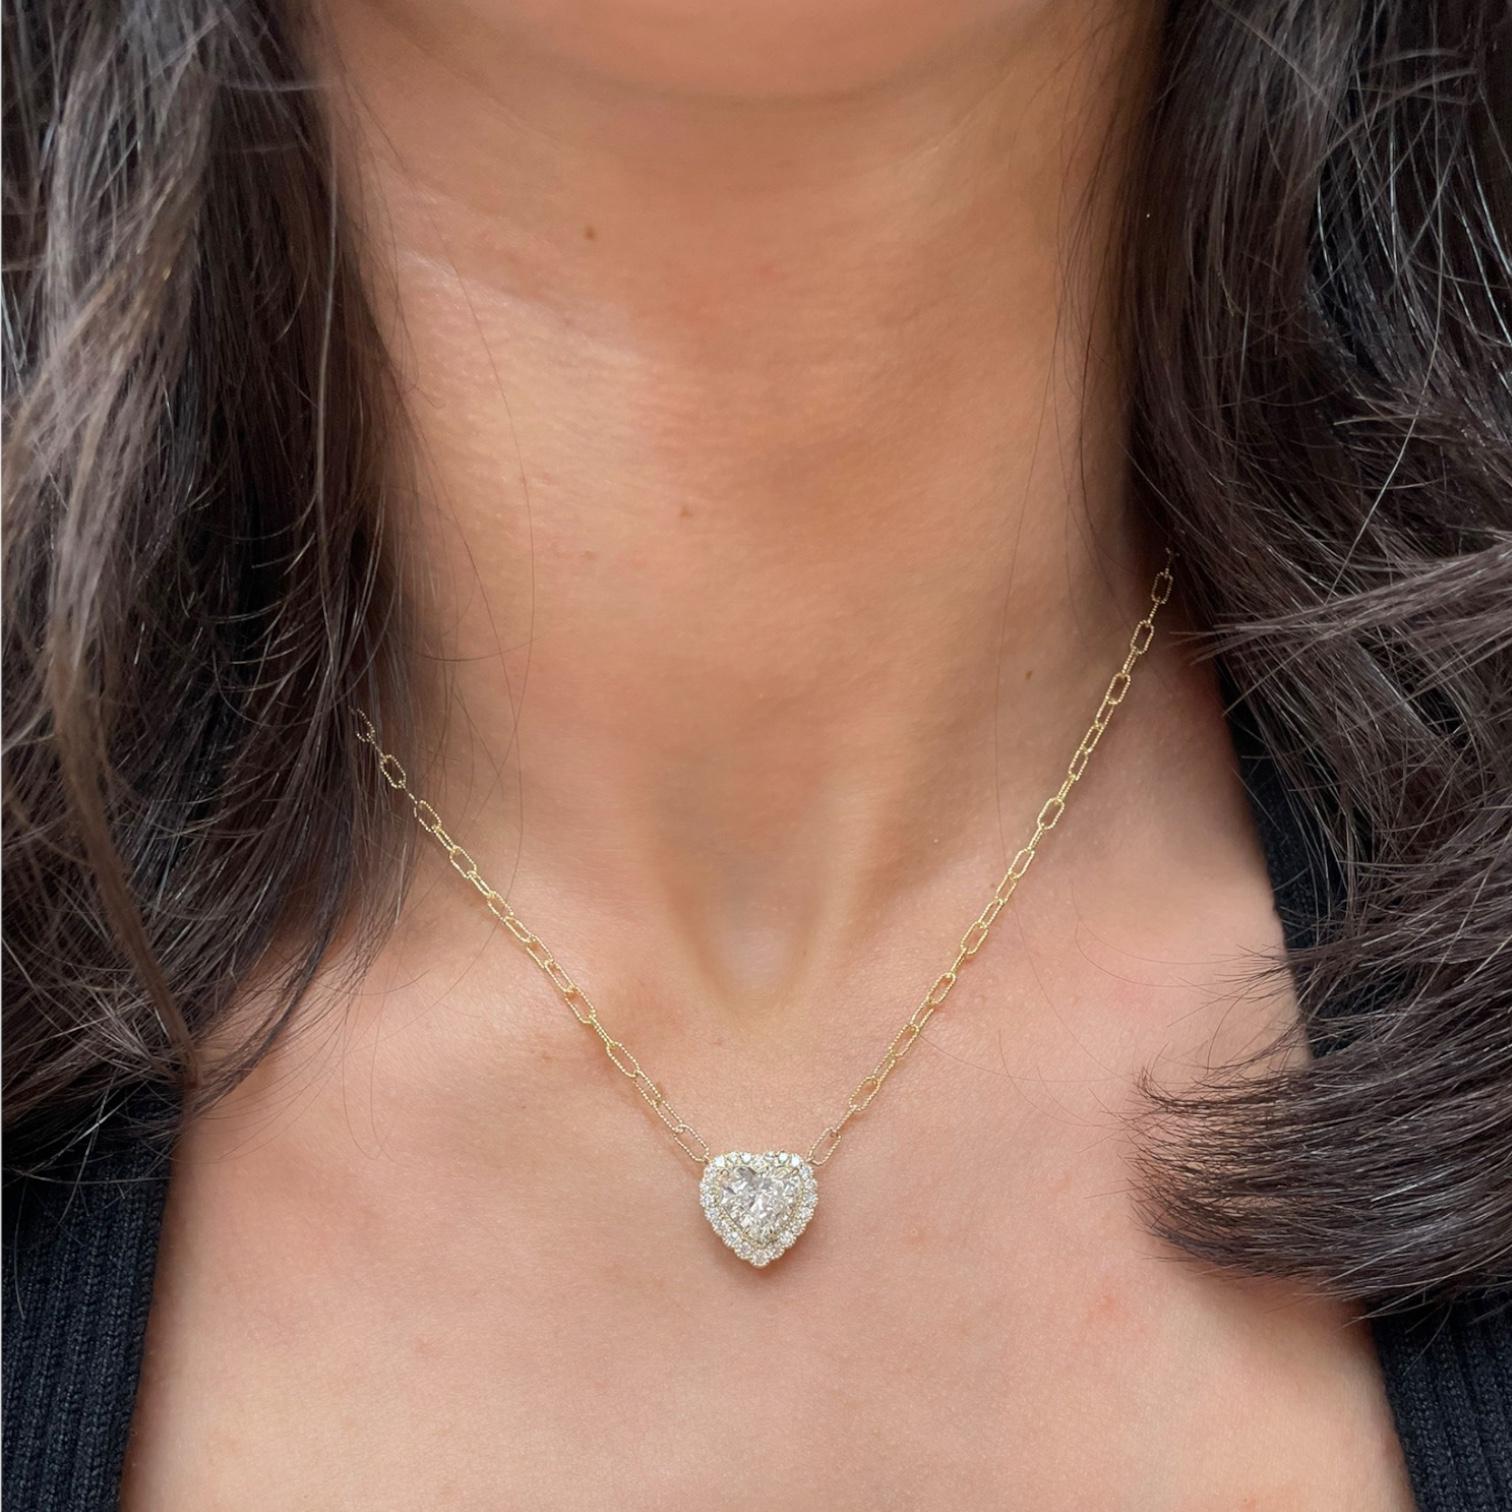 Pendant necklace contains one heart shape diamond, 2.02ct and round brilliant diamonds, 0.35tcw. Based on our opinion, center diamond is G in color and SI2 in clarity. Center diamond does not come with a lab report. Diamonds within halo are near